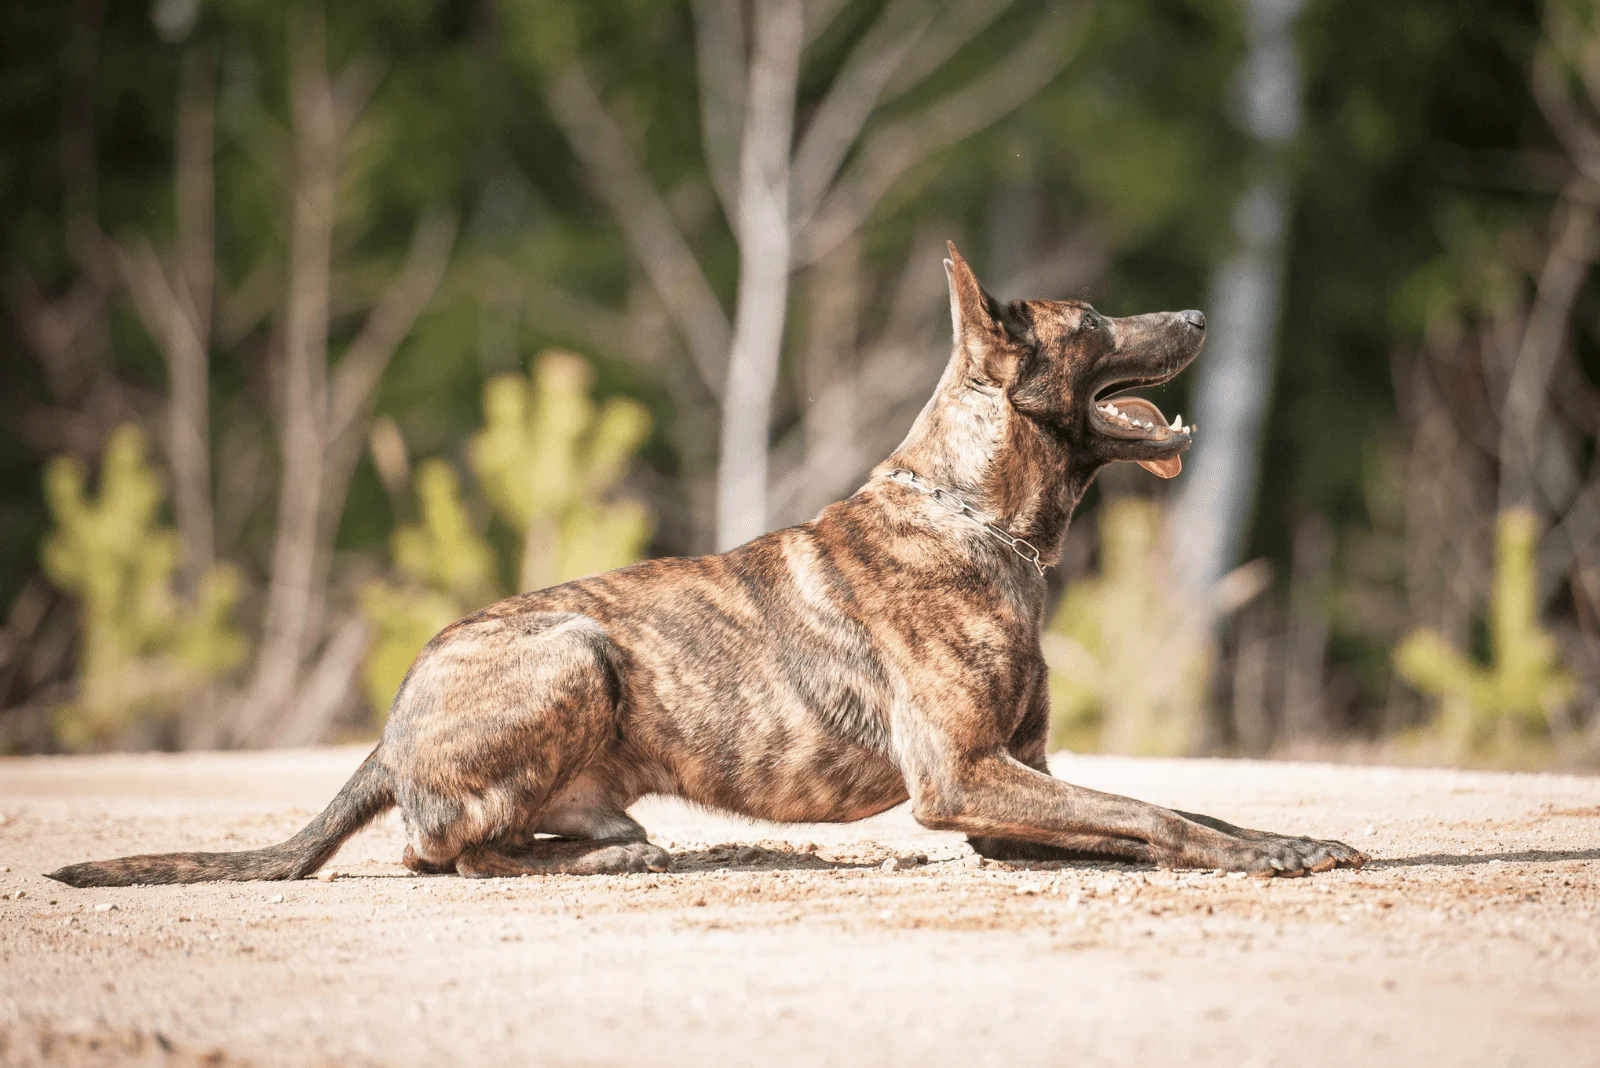 Dutch Shepherd lies on the sand with his tongue out